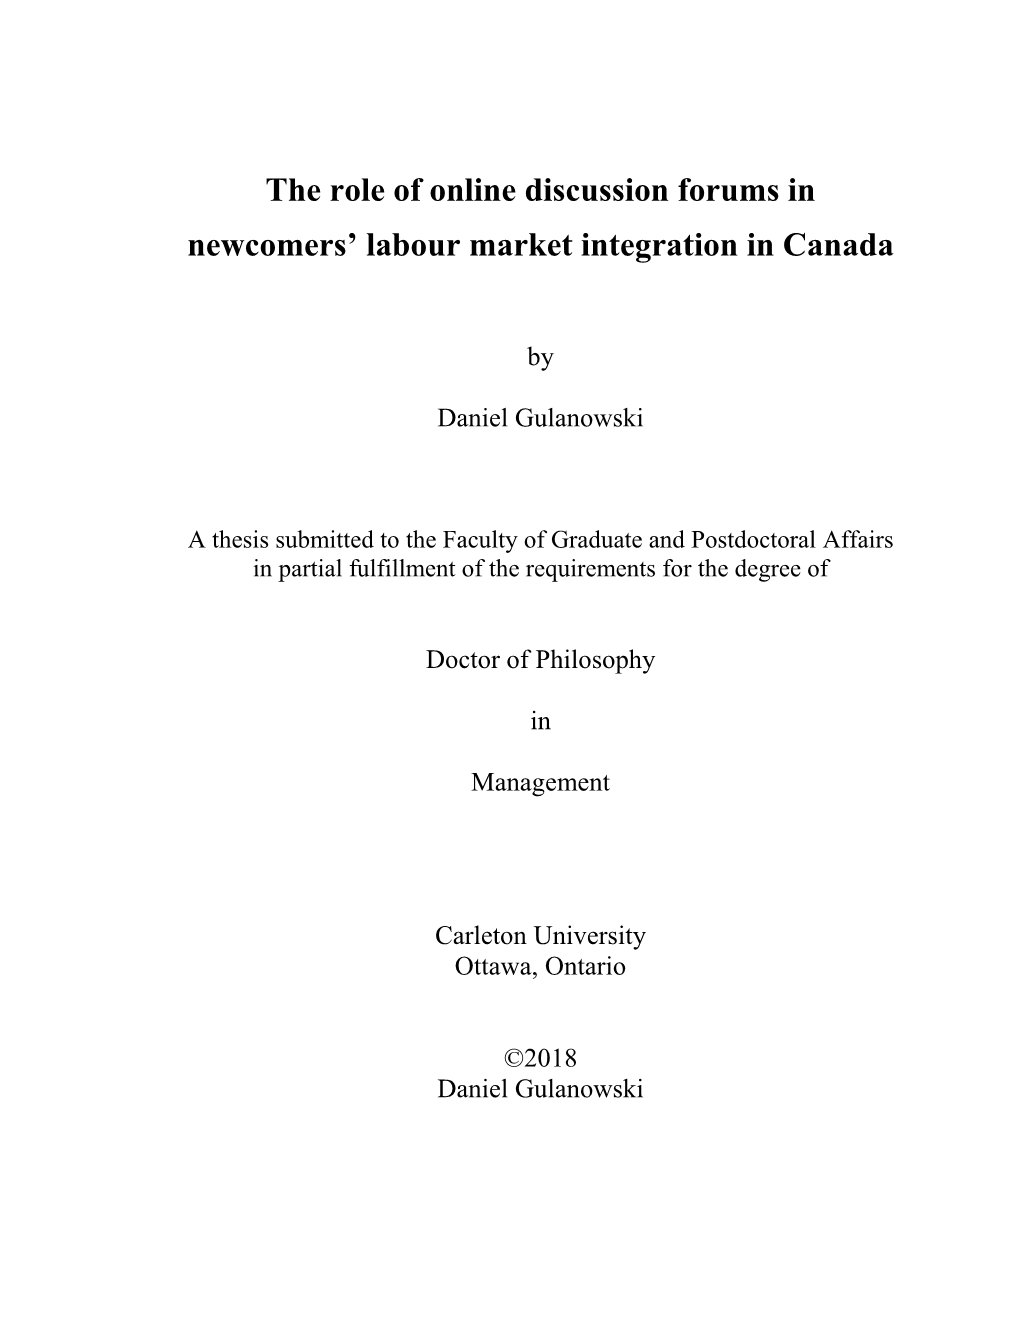 The Role of Online Discussion Forums in Newcomers' Labour Market